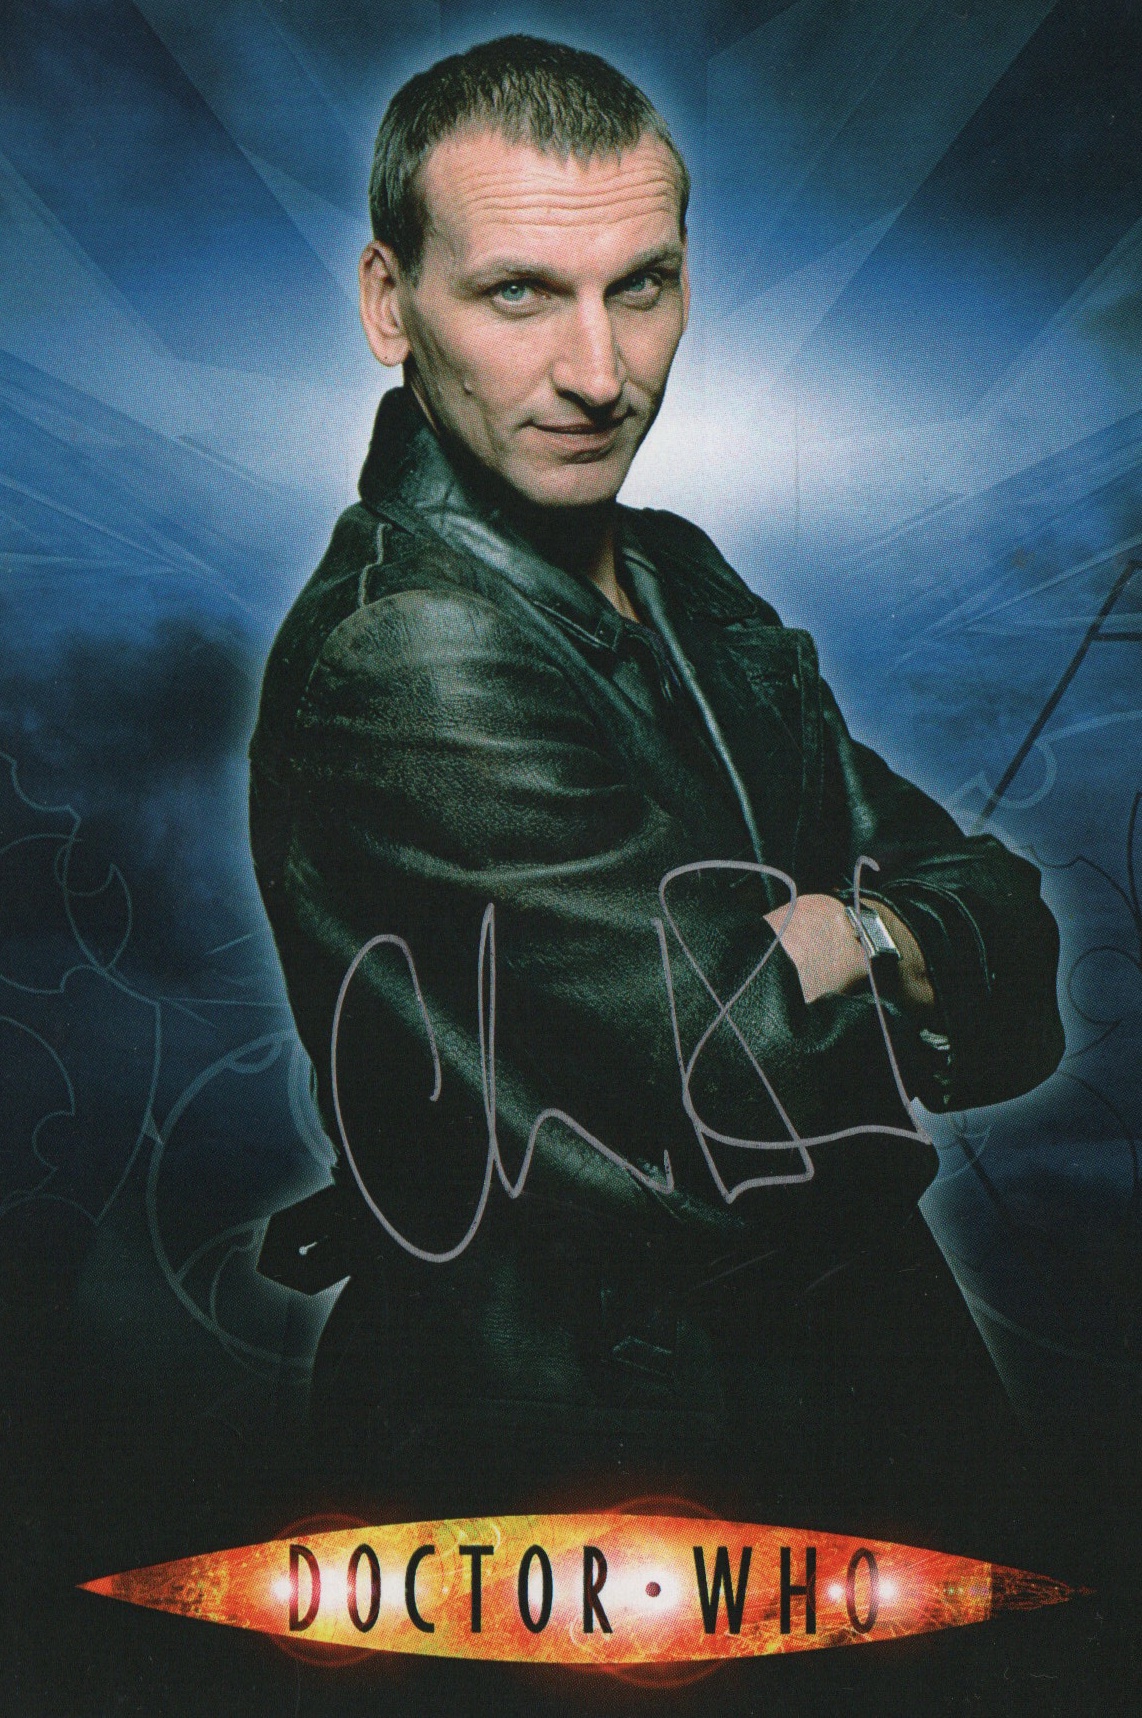 A6 full colour Doctor Who postcard features Christopher Ecclestone as the 9th Doctor. Issued by BBC Wales.